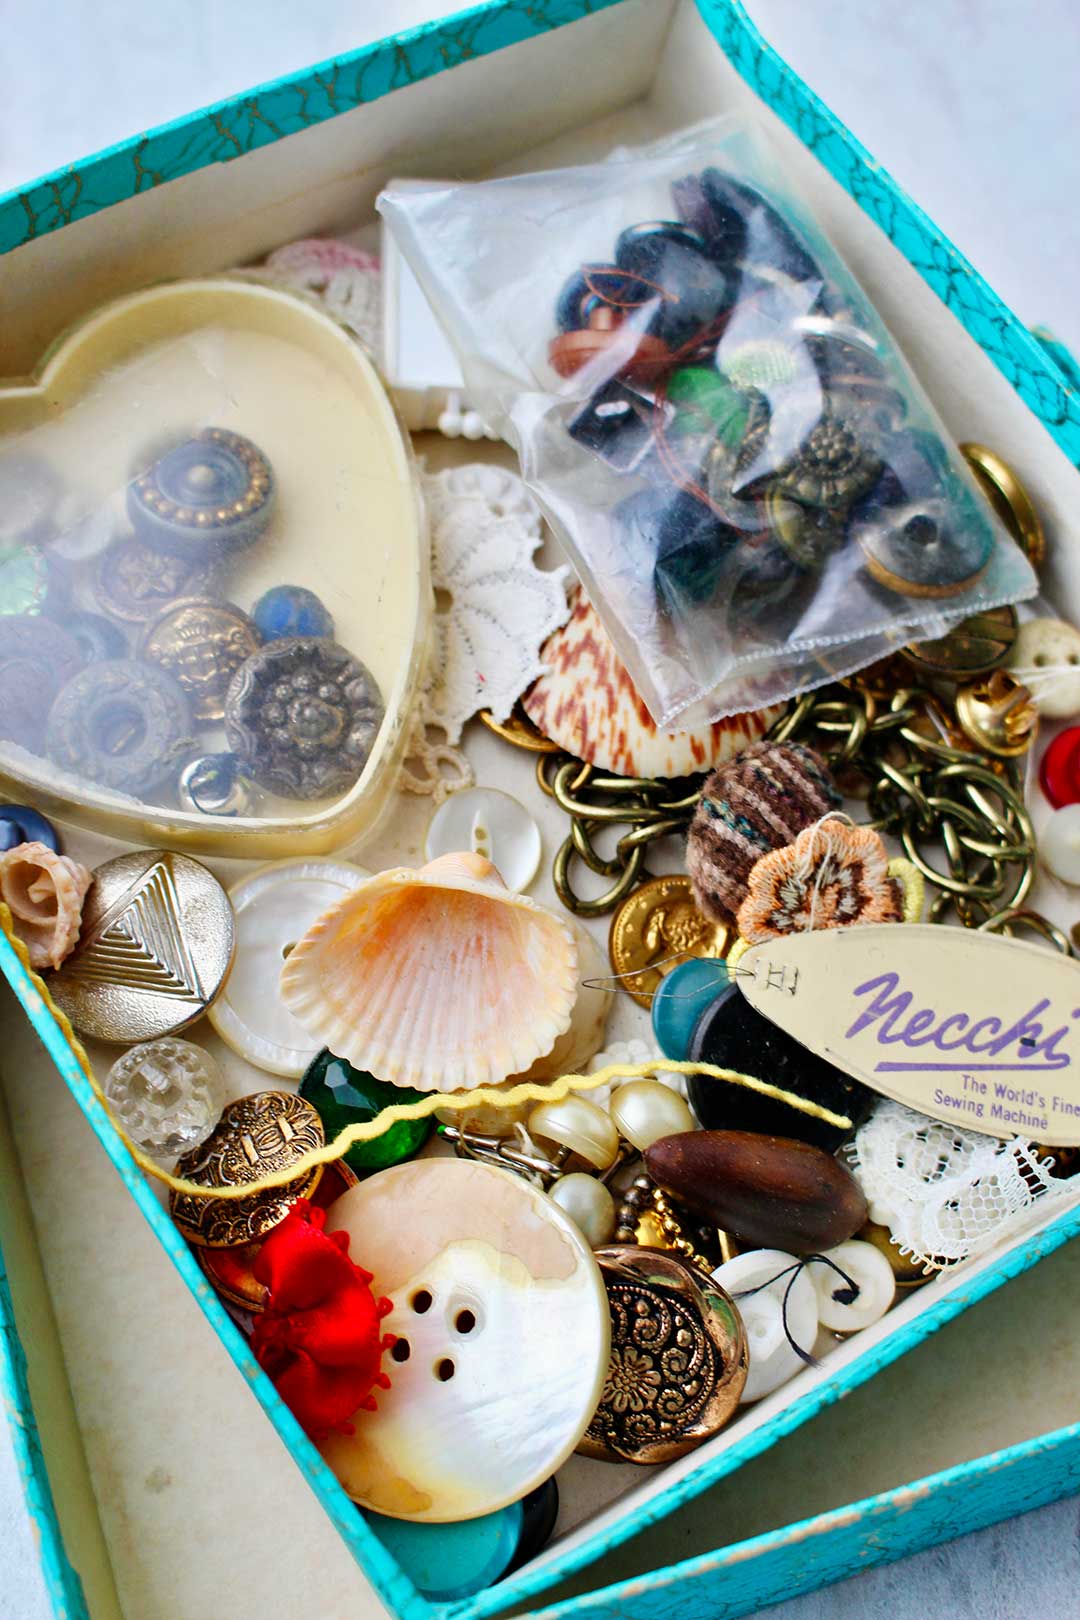 Inside of an old box of items like vintage buttons, old chains, and shells.